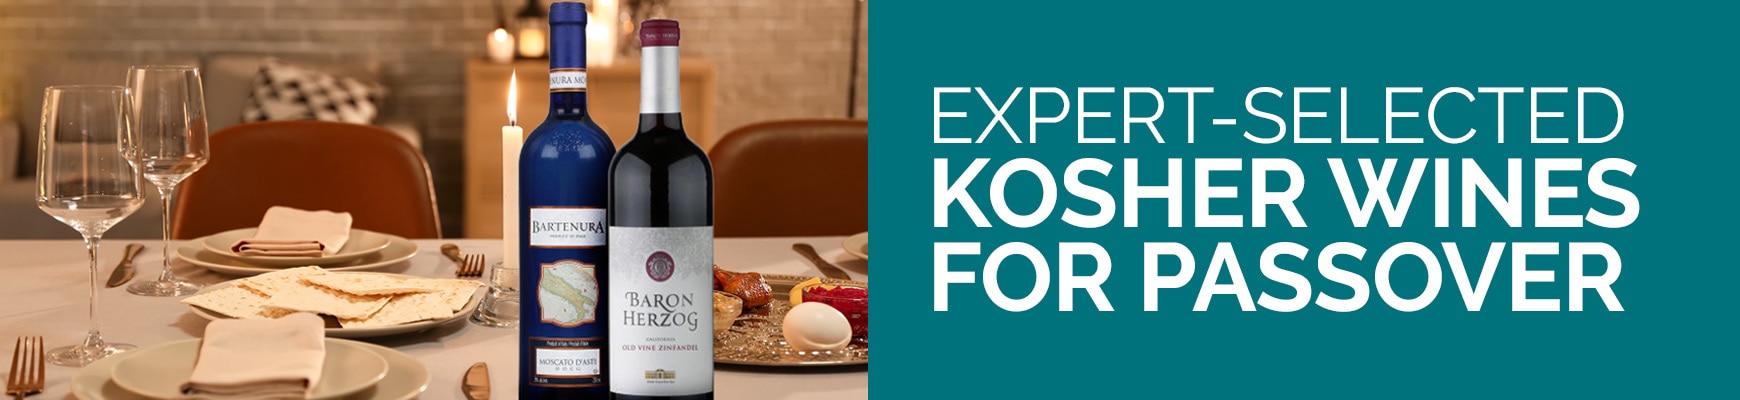 Expert-Selected Kosher Wines for Passover 